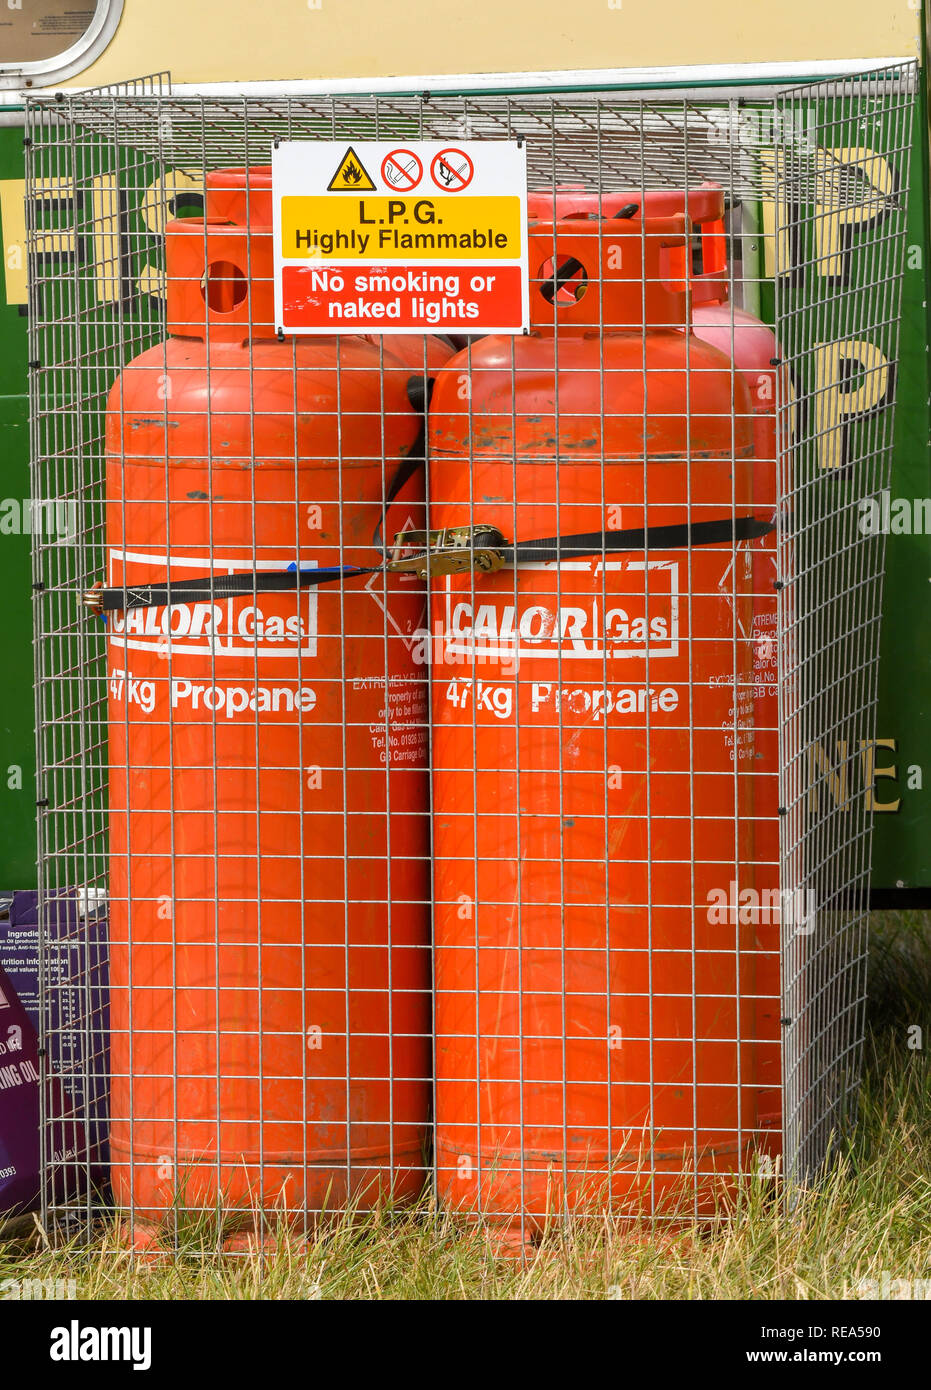 FAIRFORD, ENGLAND - JULY 2018: Can of Pair of propane gas bottles locked in a metal cage at an outdoor event. Stock Photo